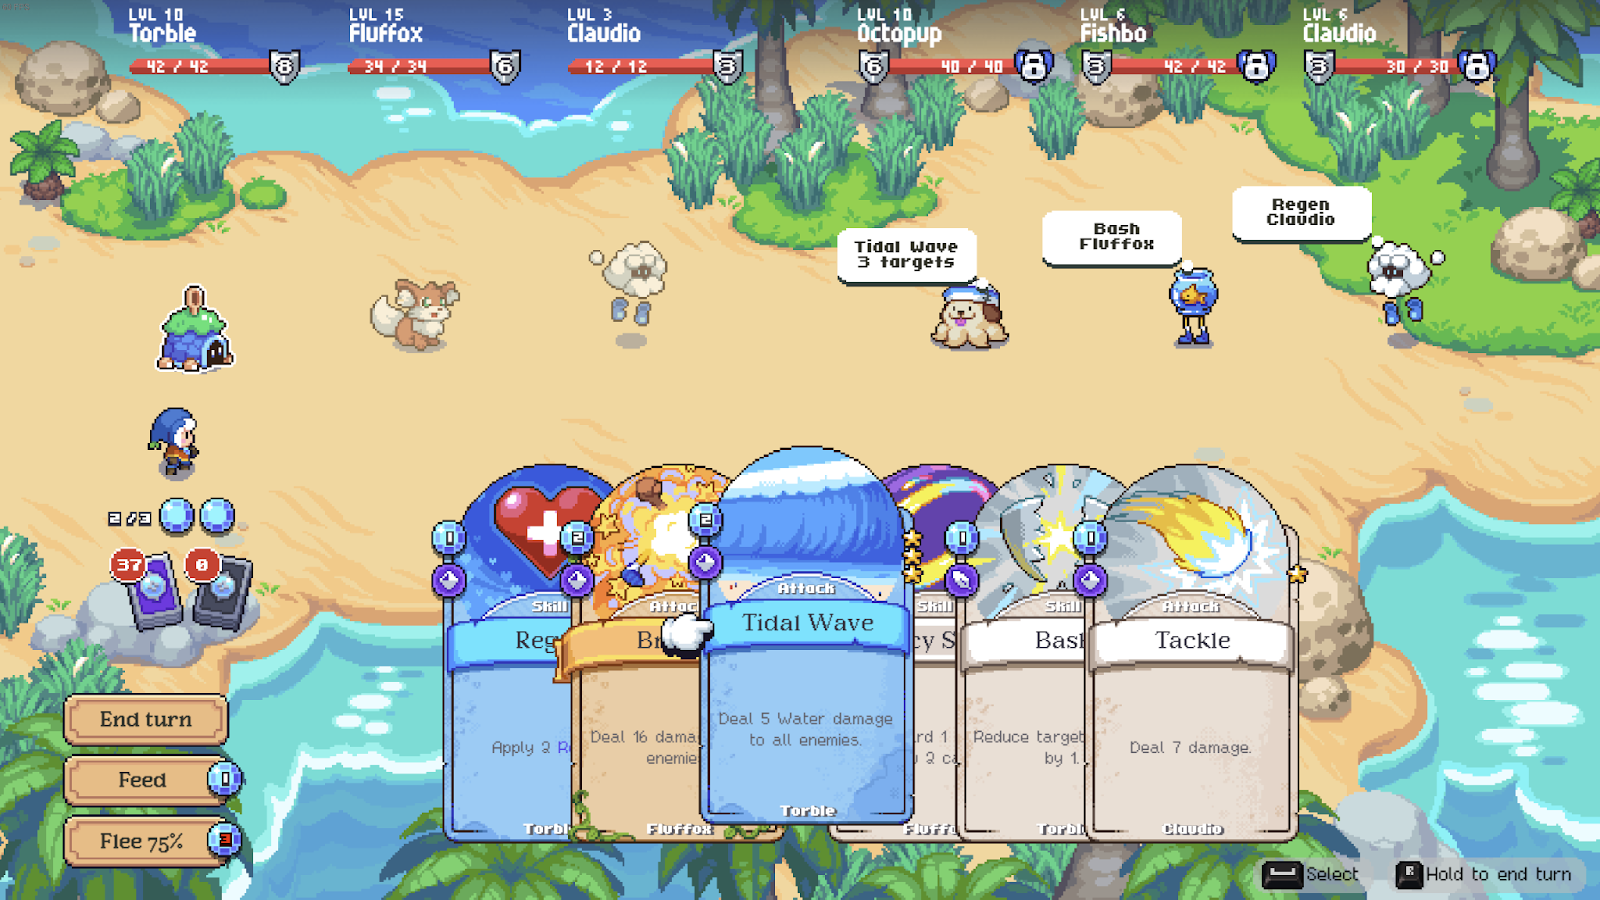 A screenshot from Moonstone Island's combat screen. Six animal-like creatures are aligned across the middle of the screen while cards at the bottom show different attacks.